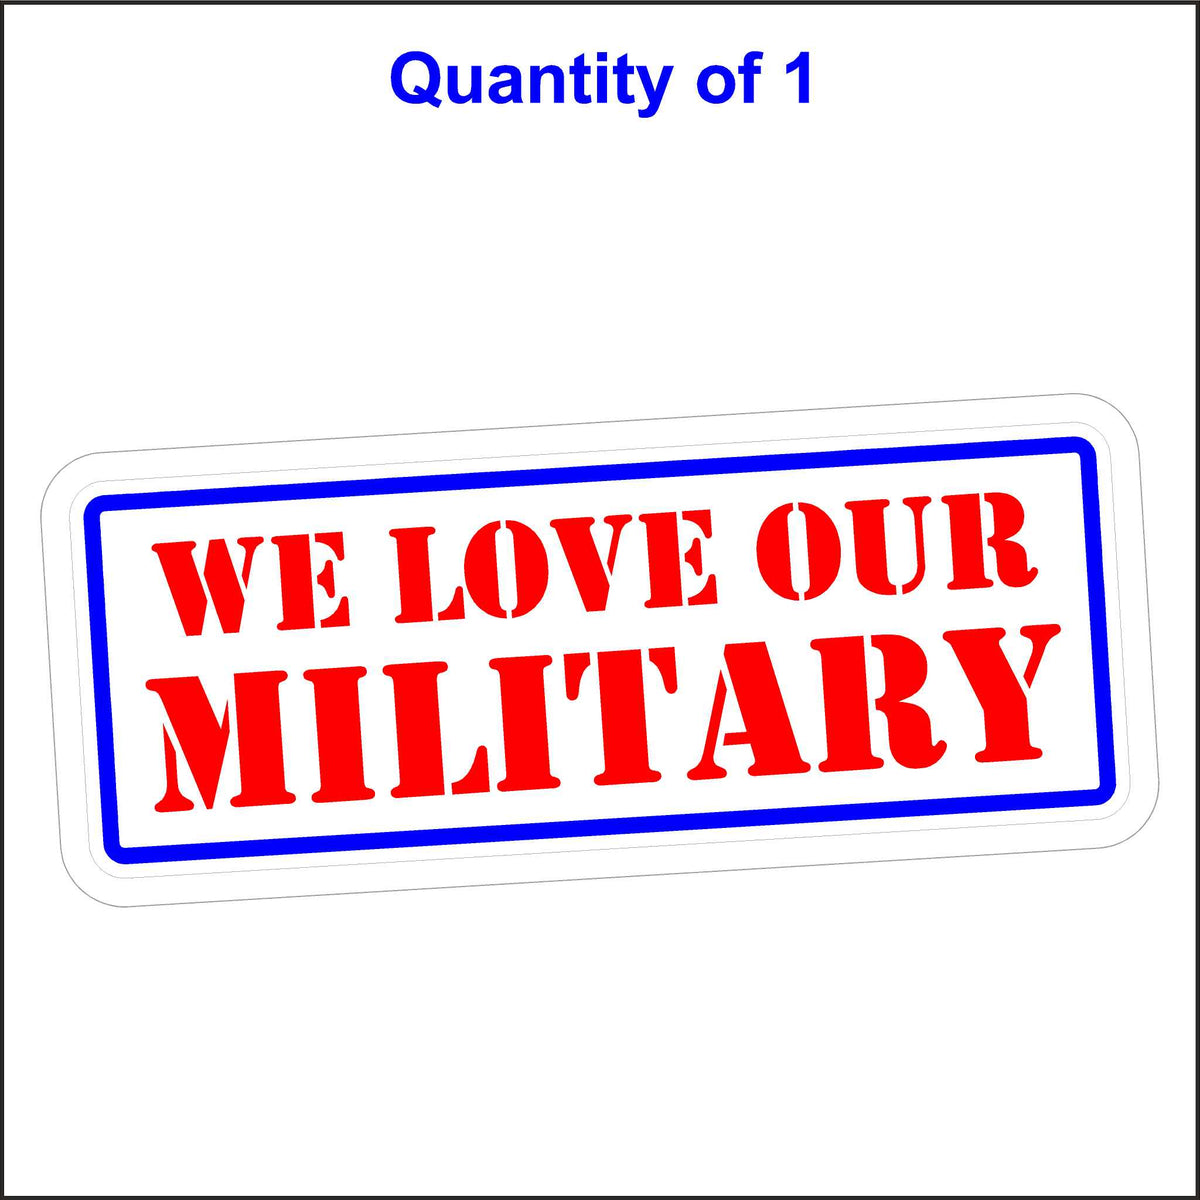 We Love Our Military Sticker.